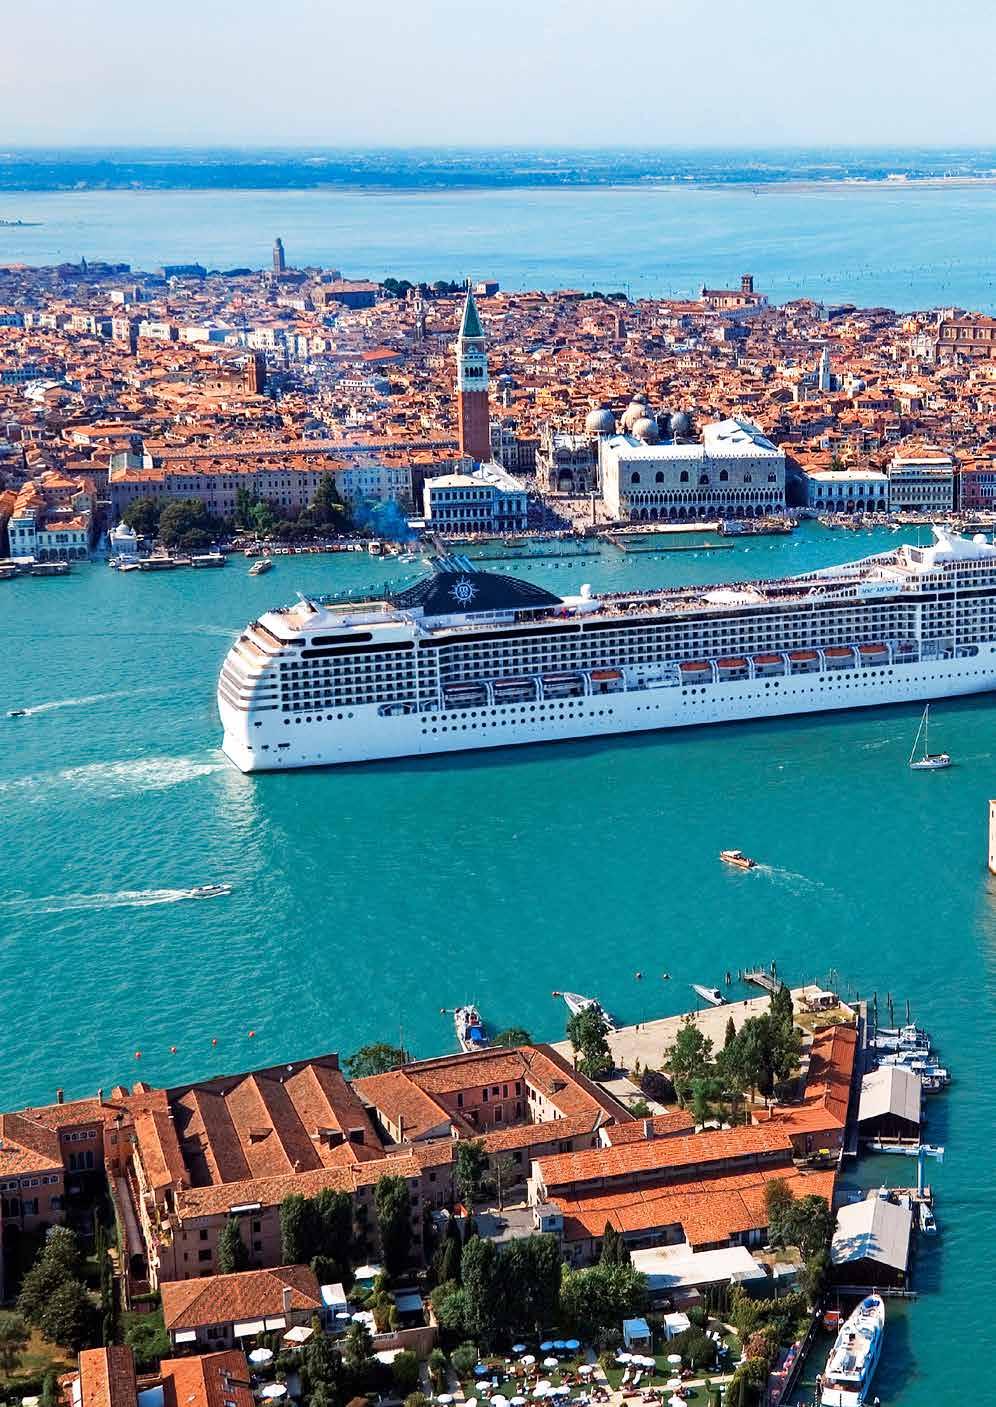 Cruise liners need to Brunvoll